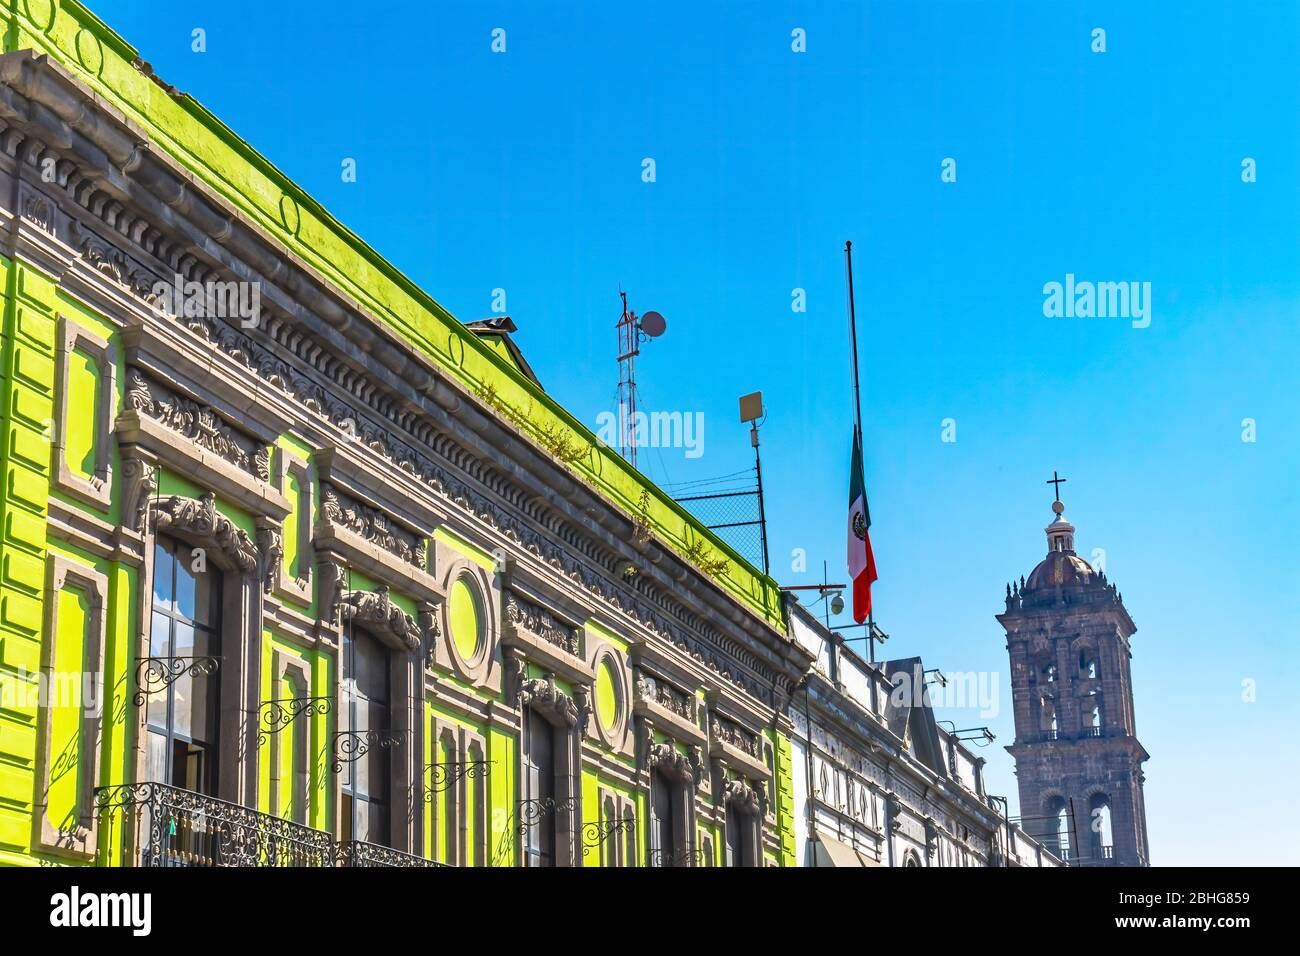 Colorful Green Balconies Shopping Street Cathedral Puebla Mexico Stock Photo